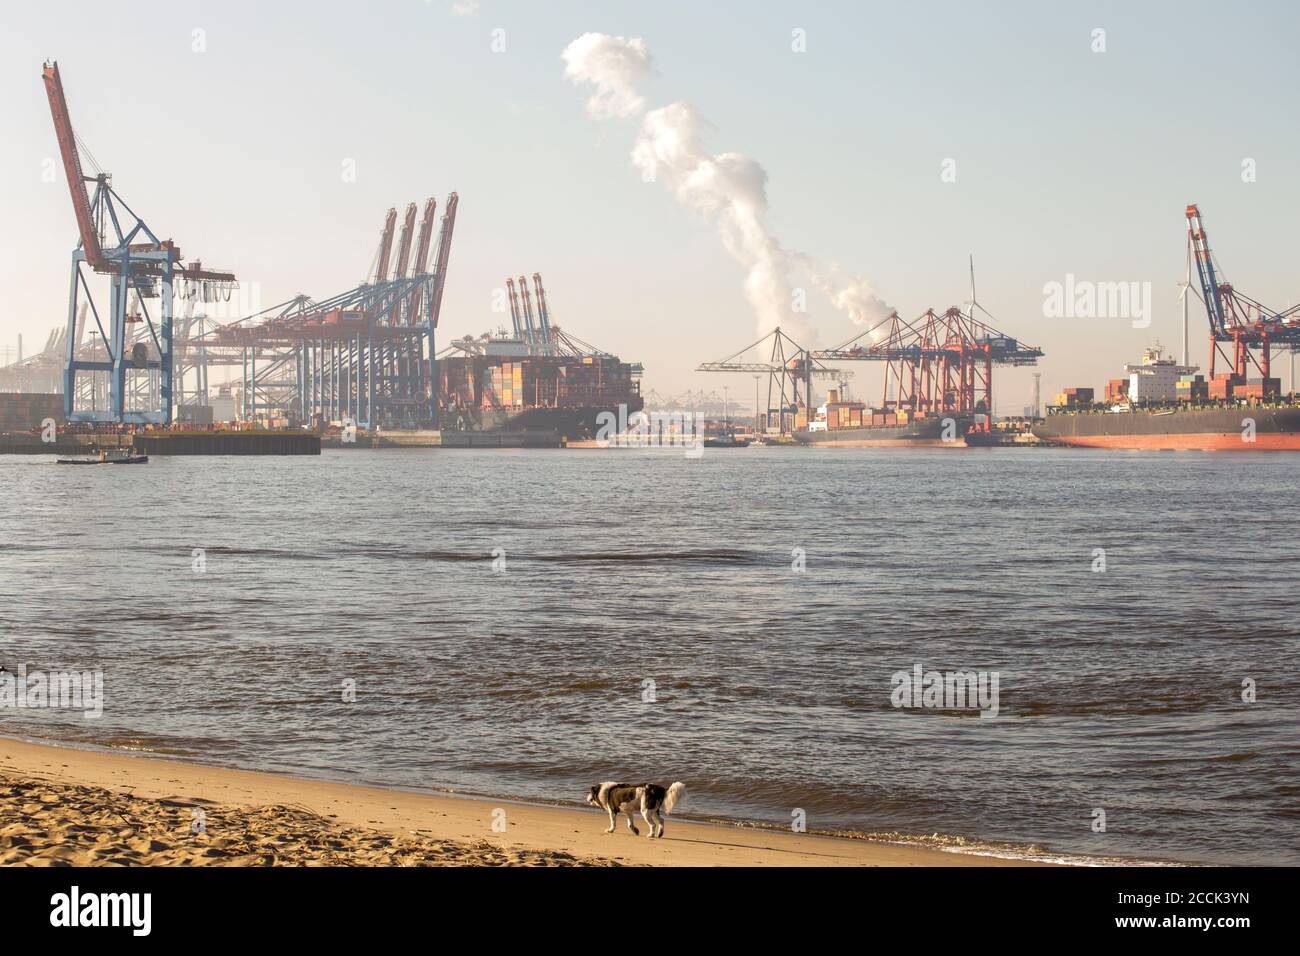 Germany, Hamburg, Dog walking along riverside beach with commercial dock in background Stock Photo